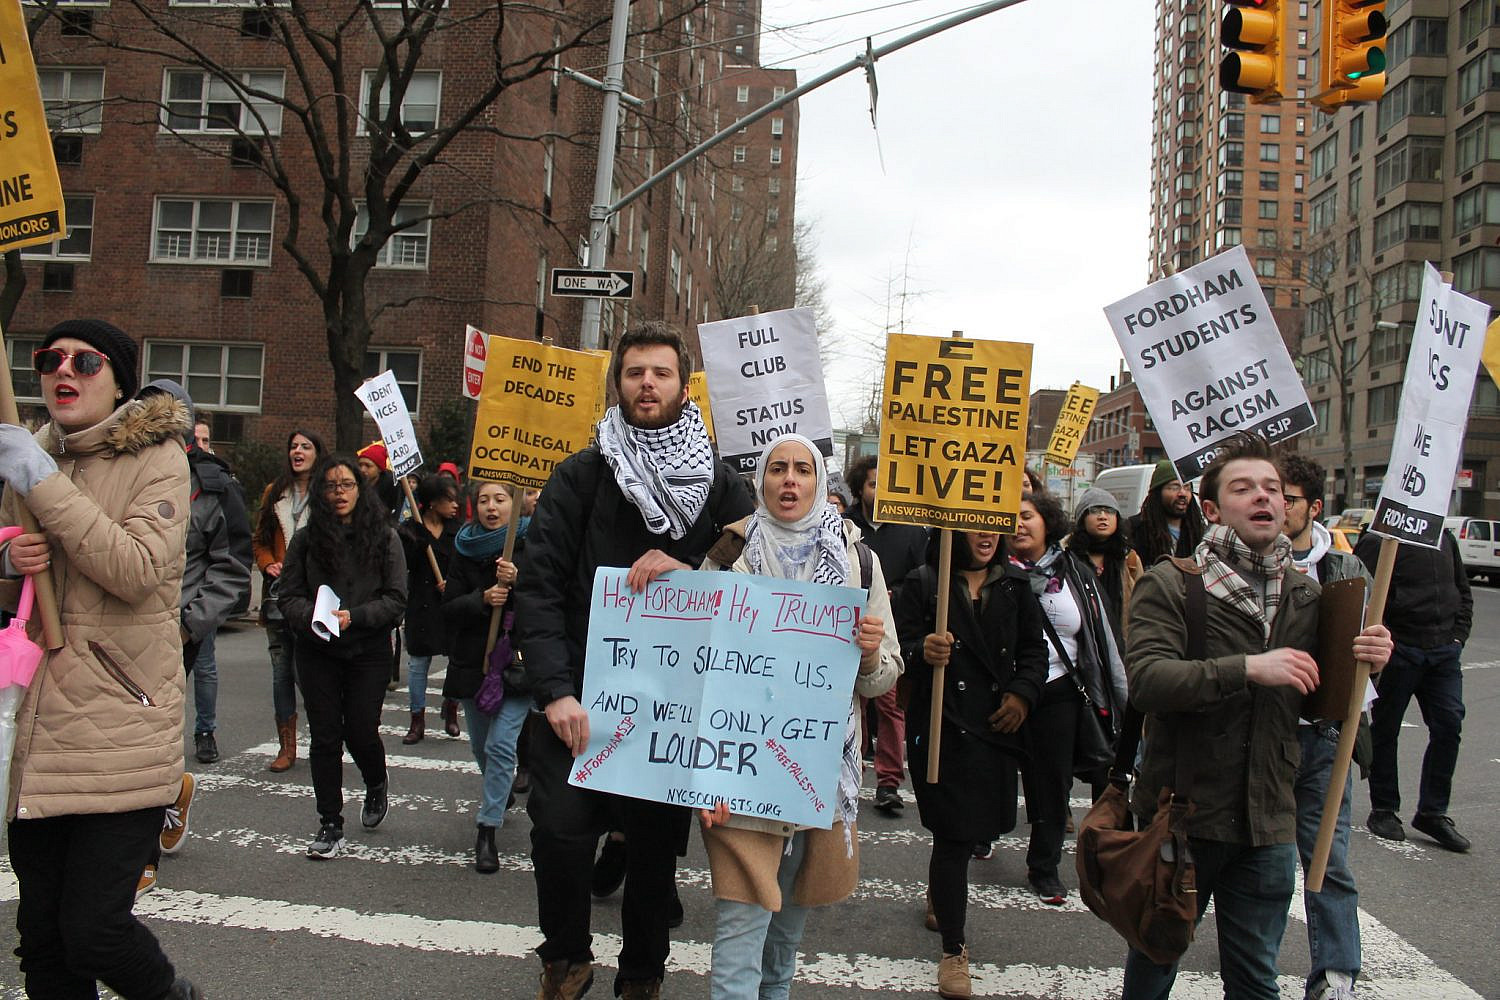 Members and supporters of Fordham Students for Justice in Palestine protest the university administration's refusal to register SJP as a student organization, in New York. Jan. 23, 2017. (Joe Catron/Flickr)